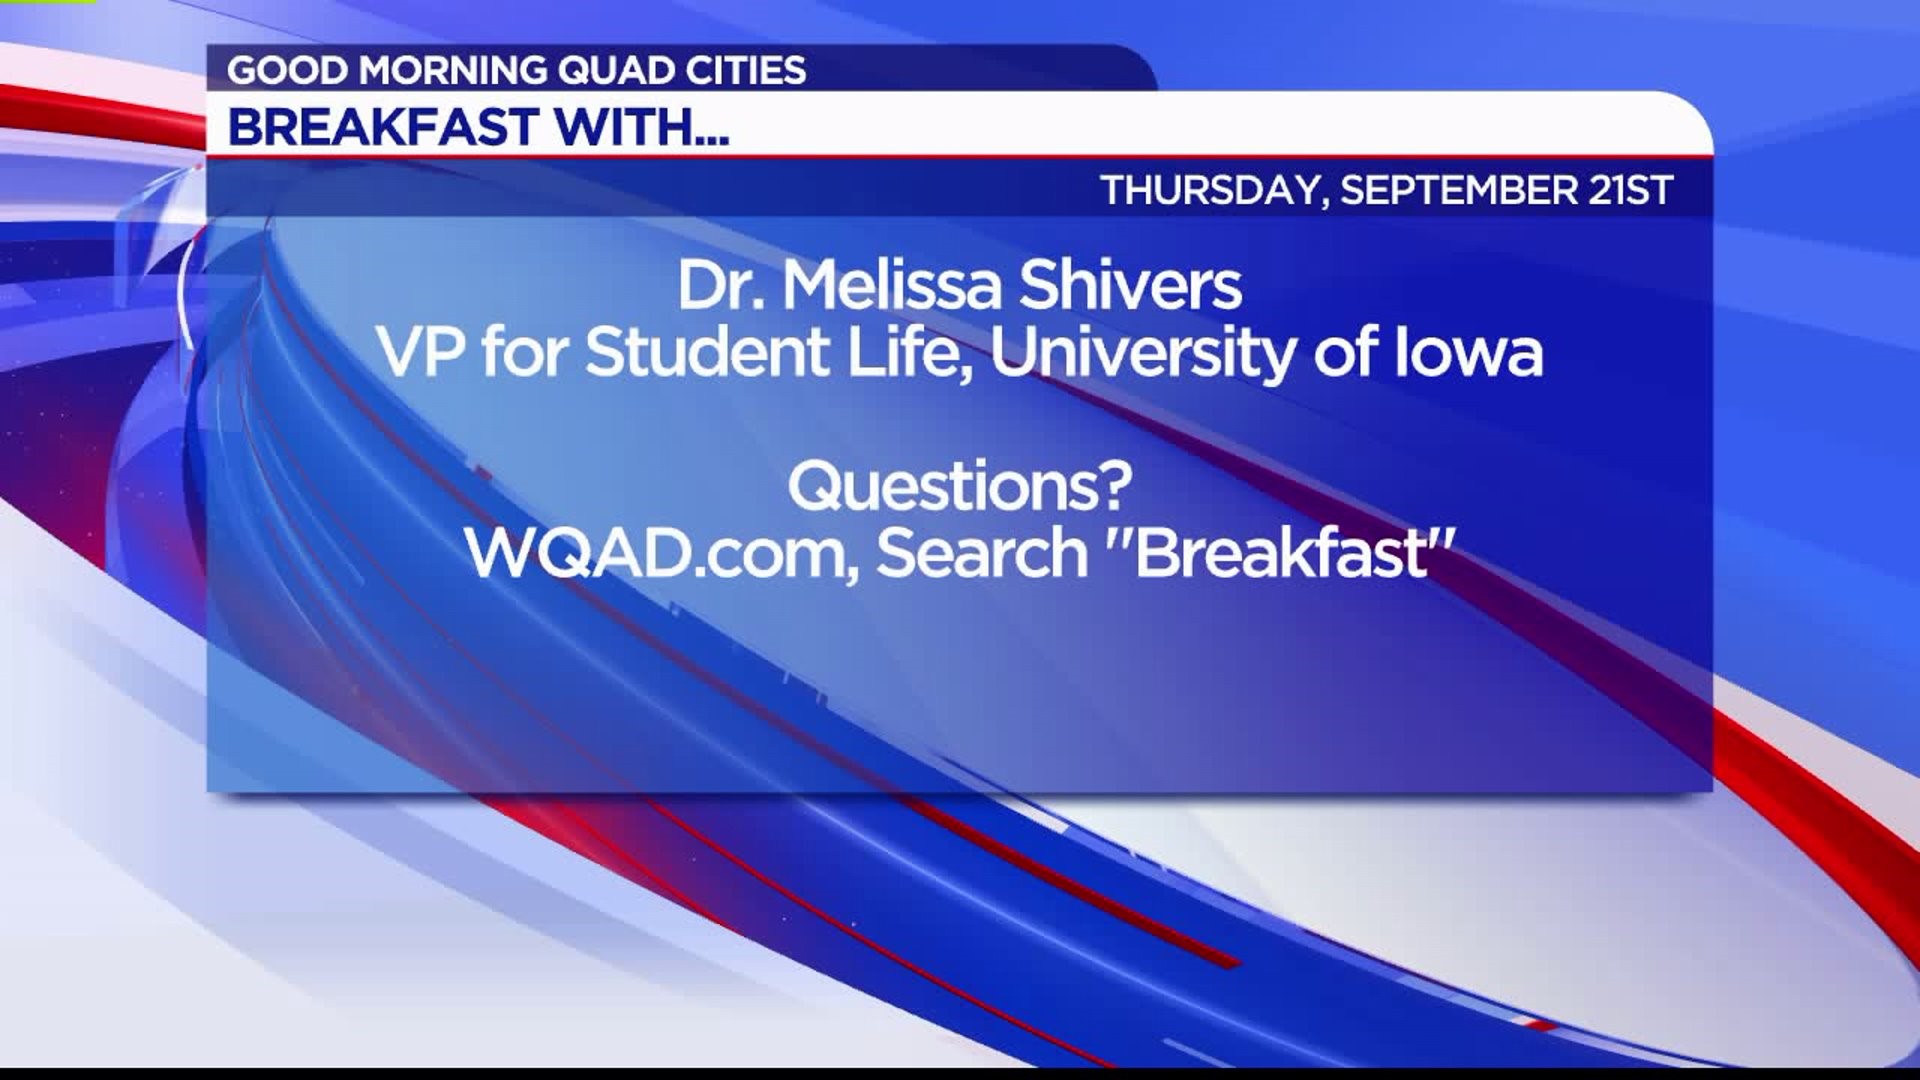 We need YOUR QUESTIONS for the University of Iowa VP for Student Life